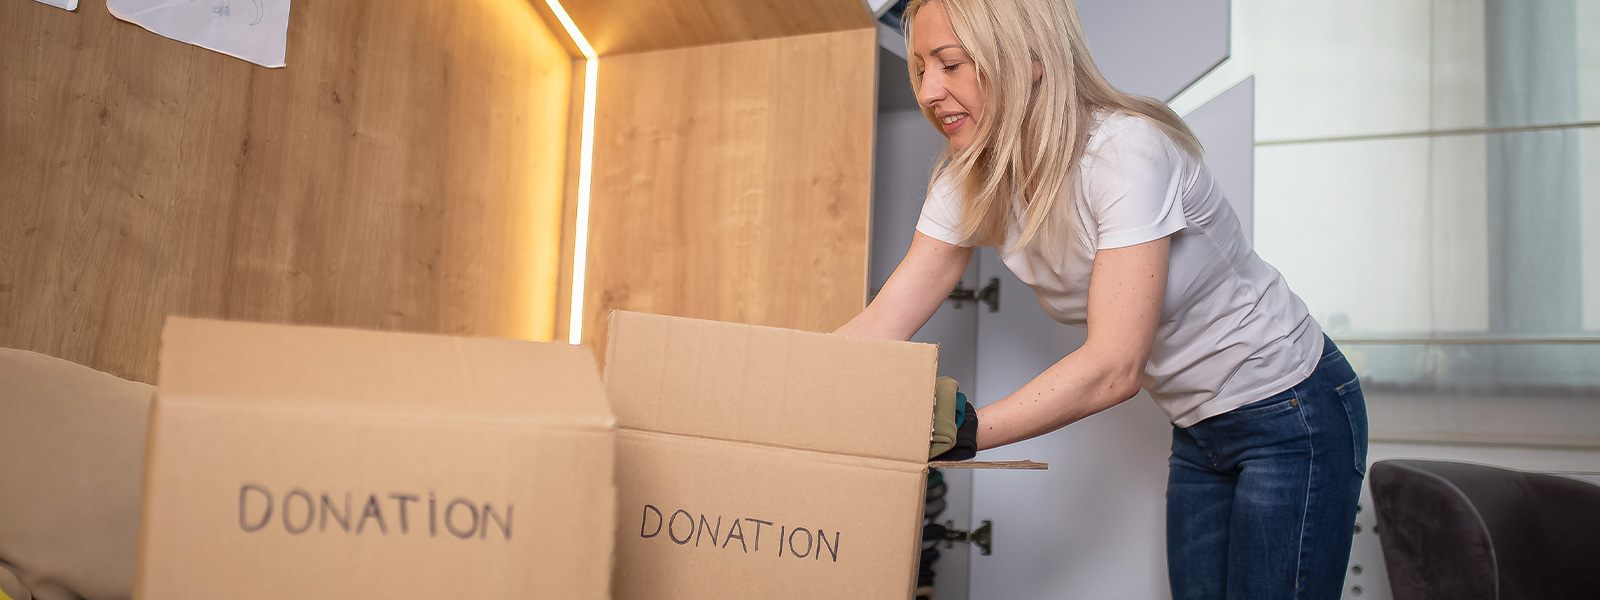 Woman putting clothes into a box marked "donation"